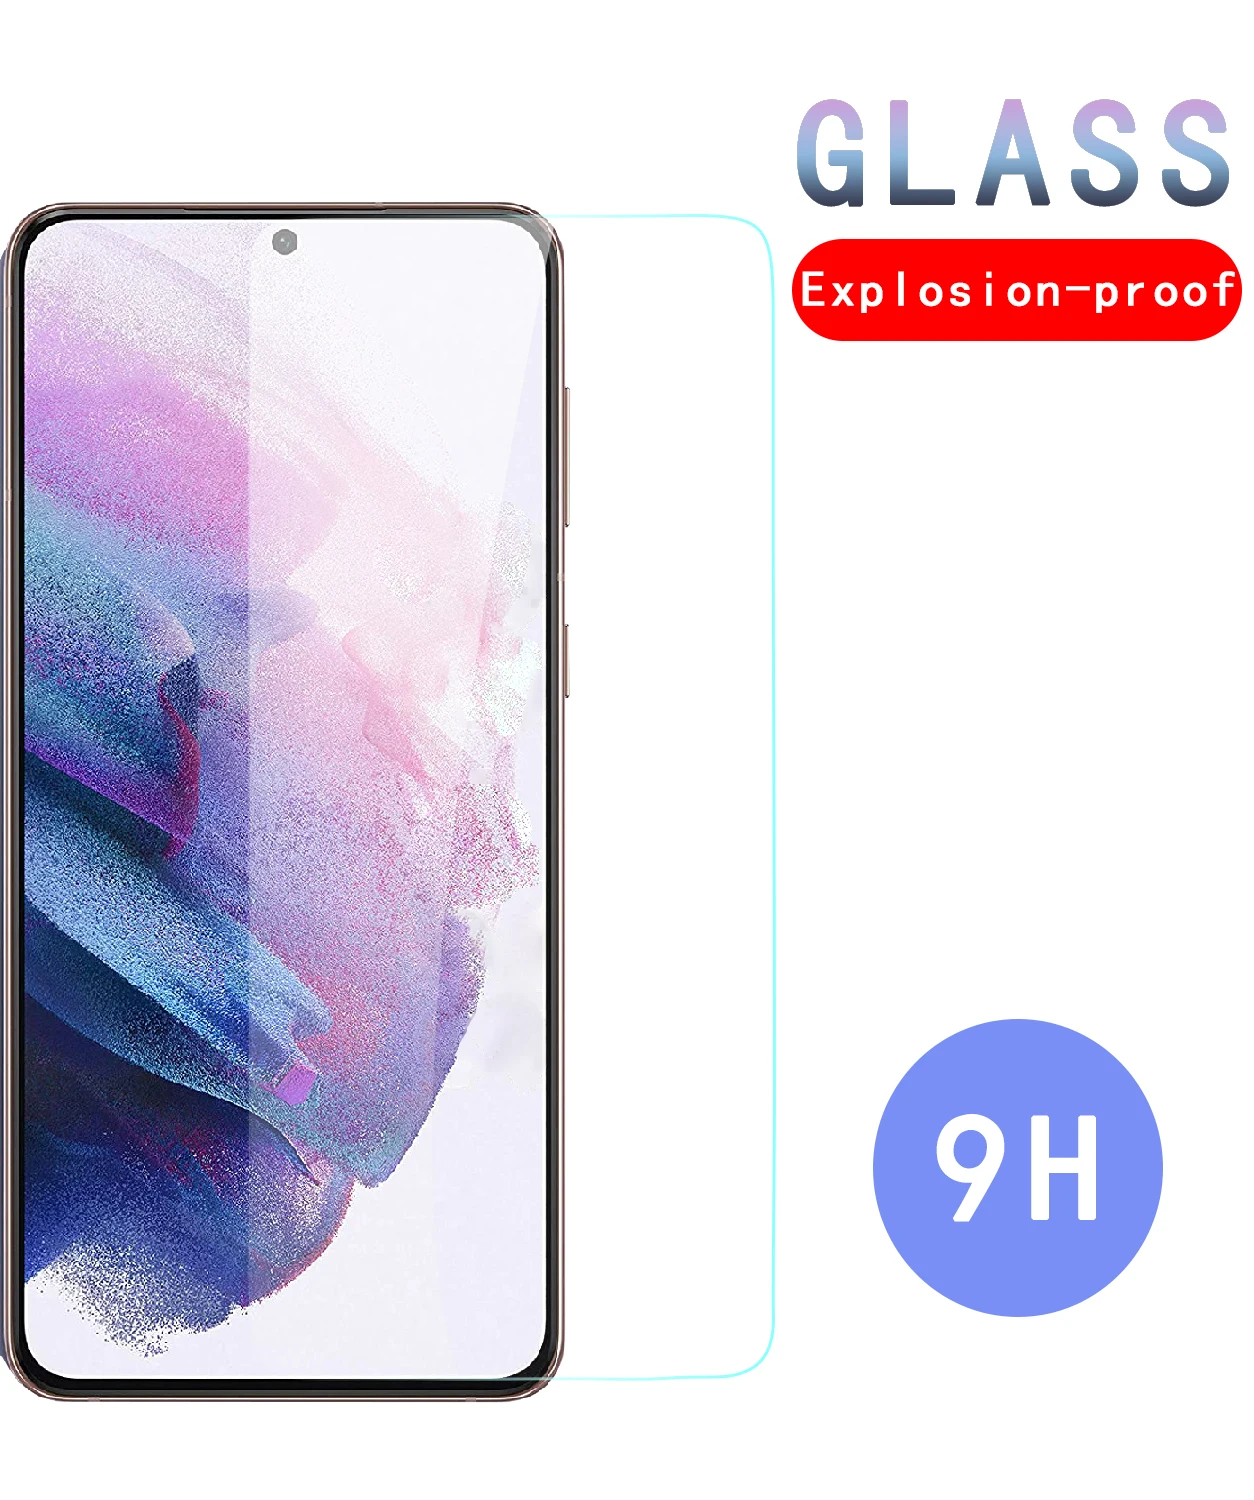 9H Protective Glass For Samsung Galaxy A71 A51 A41 A31 A21S A11 A01 Screen Protector M01 M11 M21 M31 M51 A30 A50 Safety Glass black and white cow case for samsung galaxy a51 a71 m31 a41 a31 a11 a01 m51 m21 m11 m40 black soft phone cover fundas